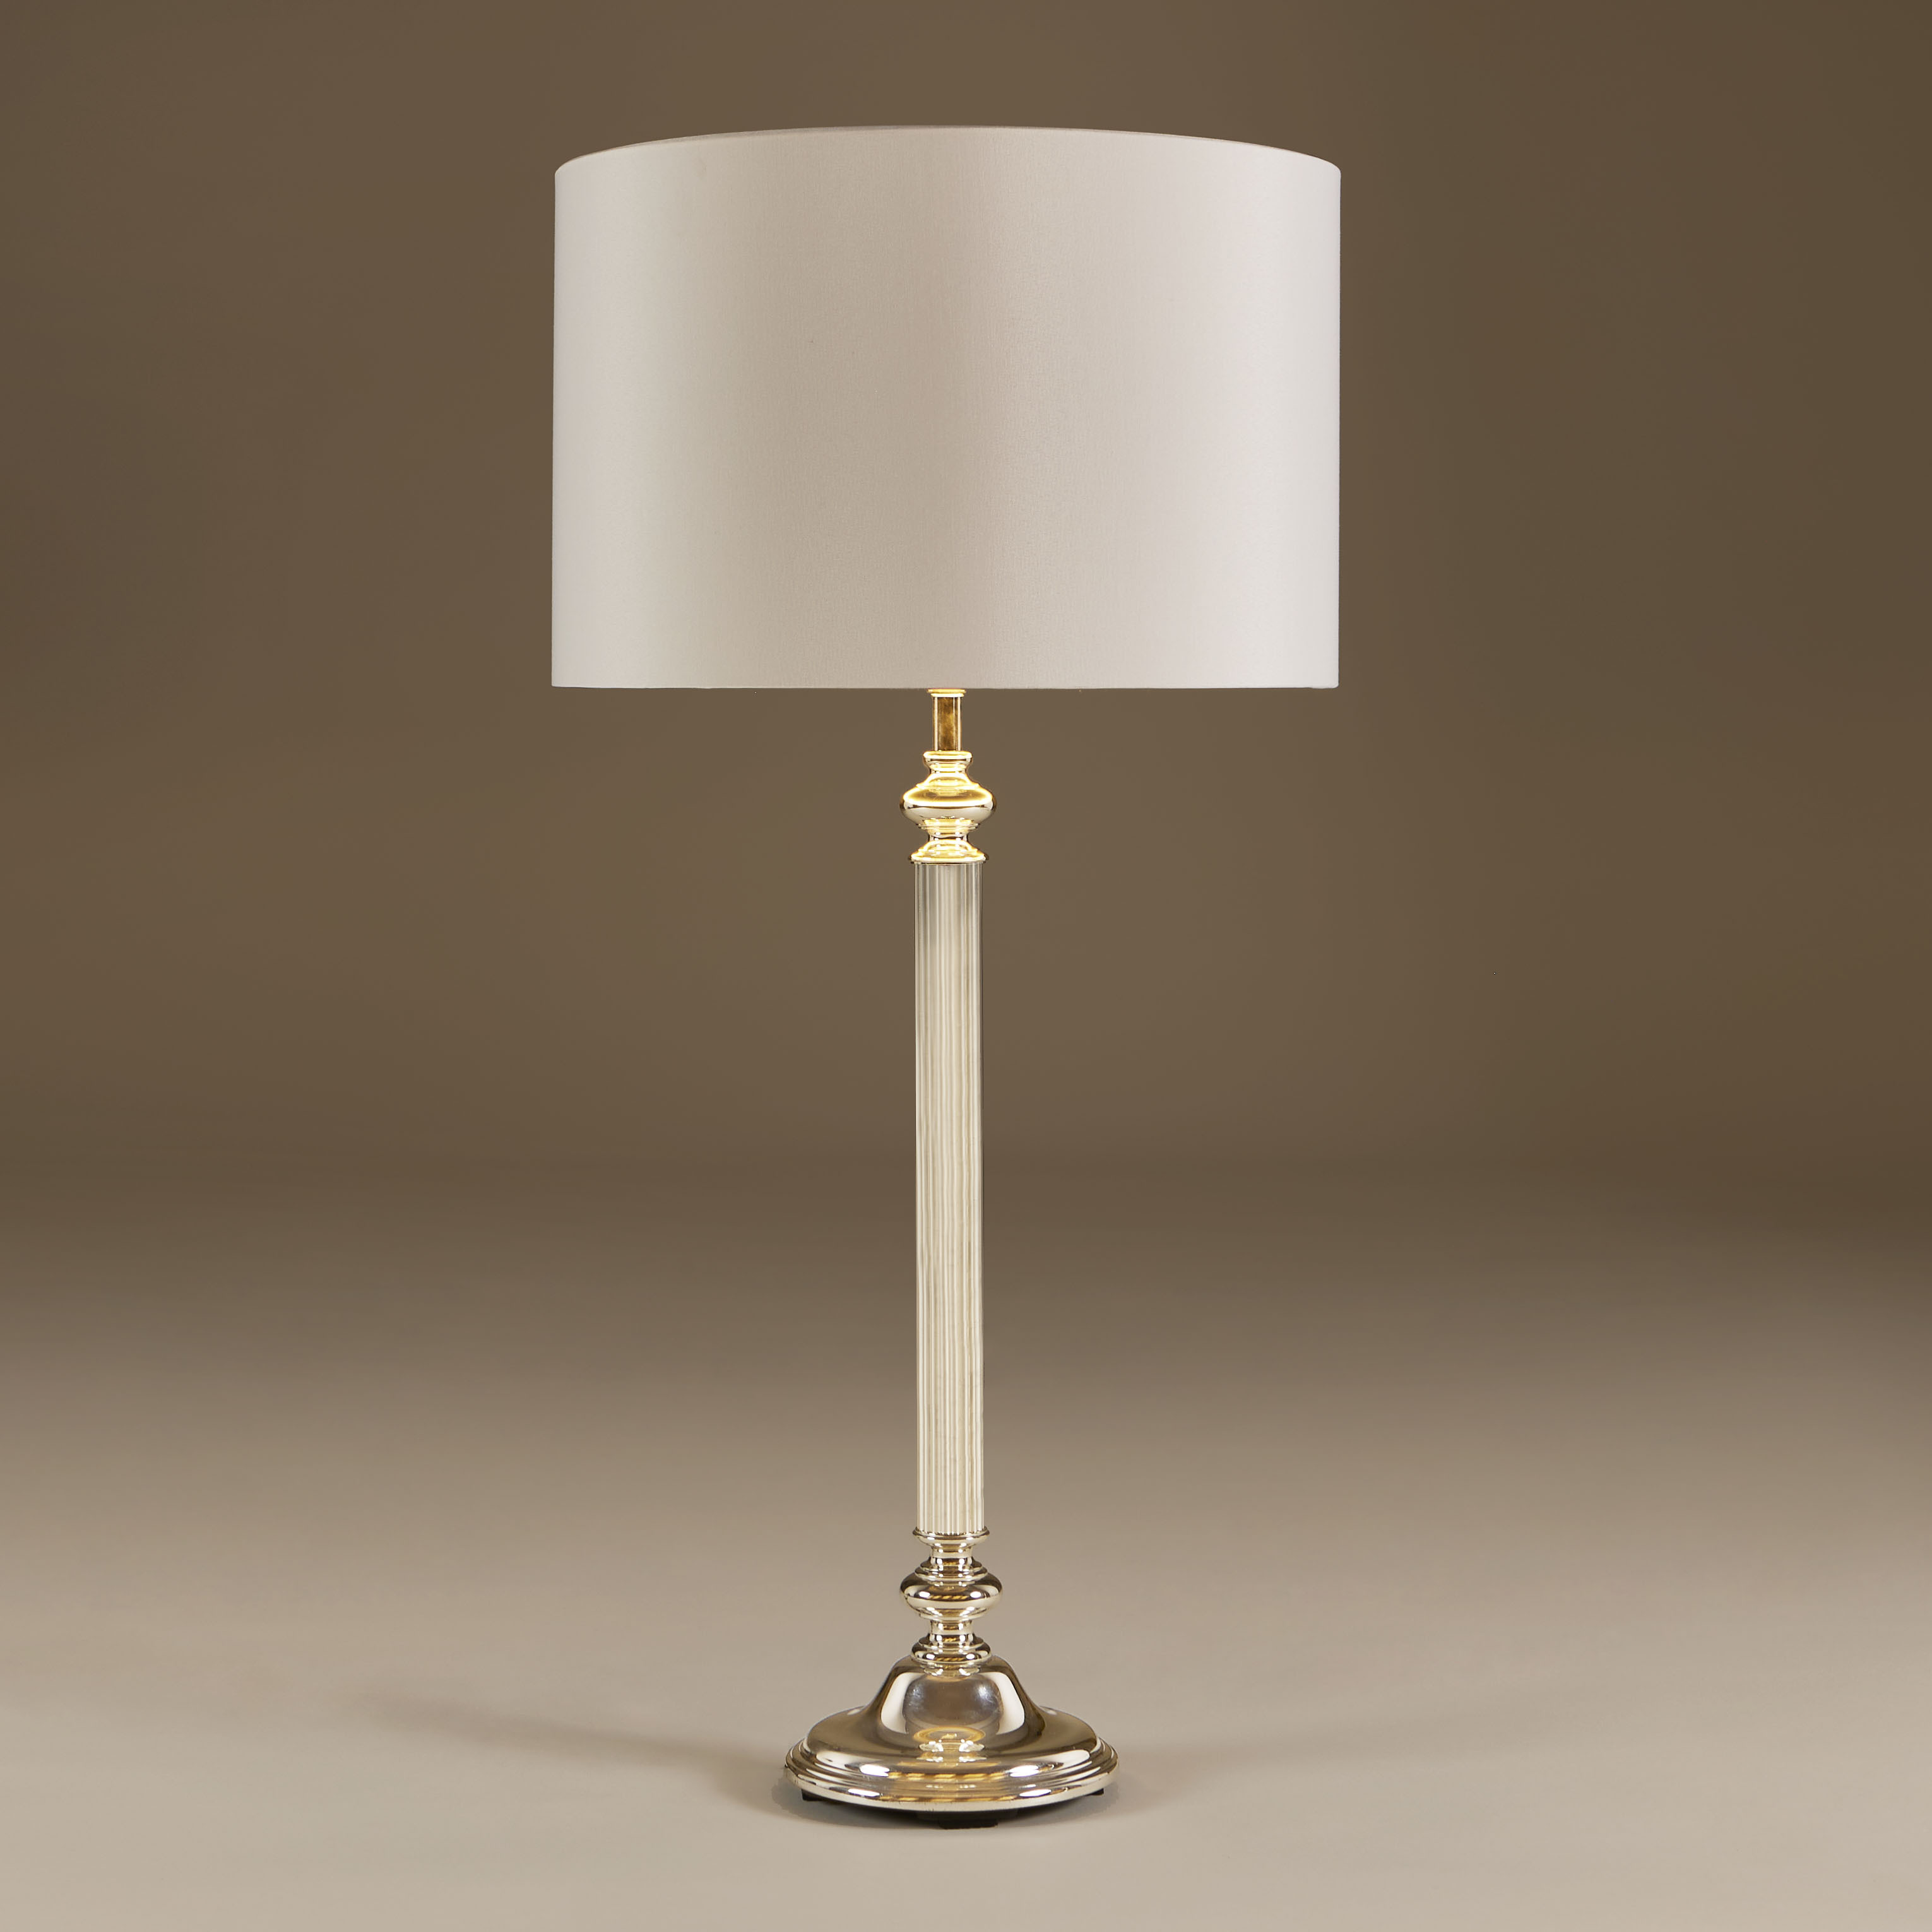 Pair Of American Chrome Table Lamps 0098 V1